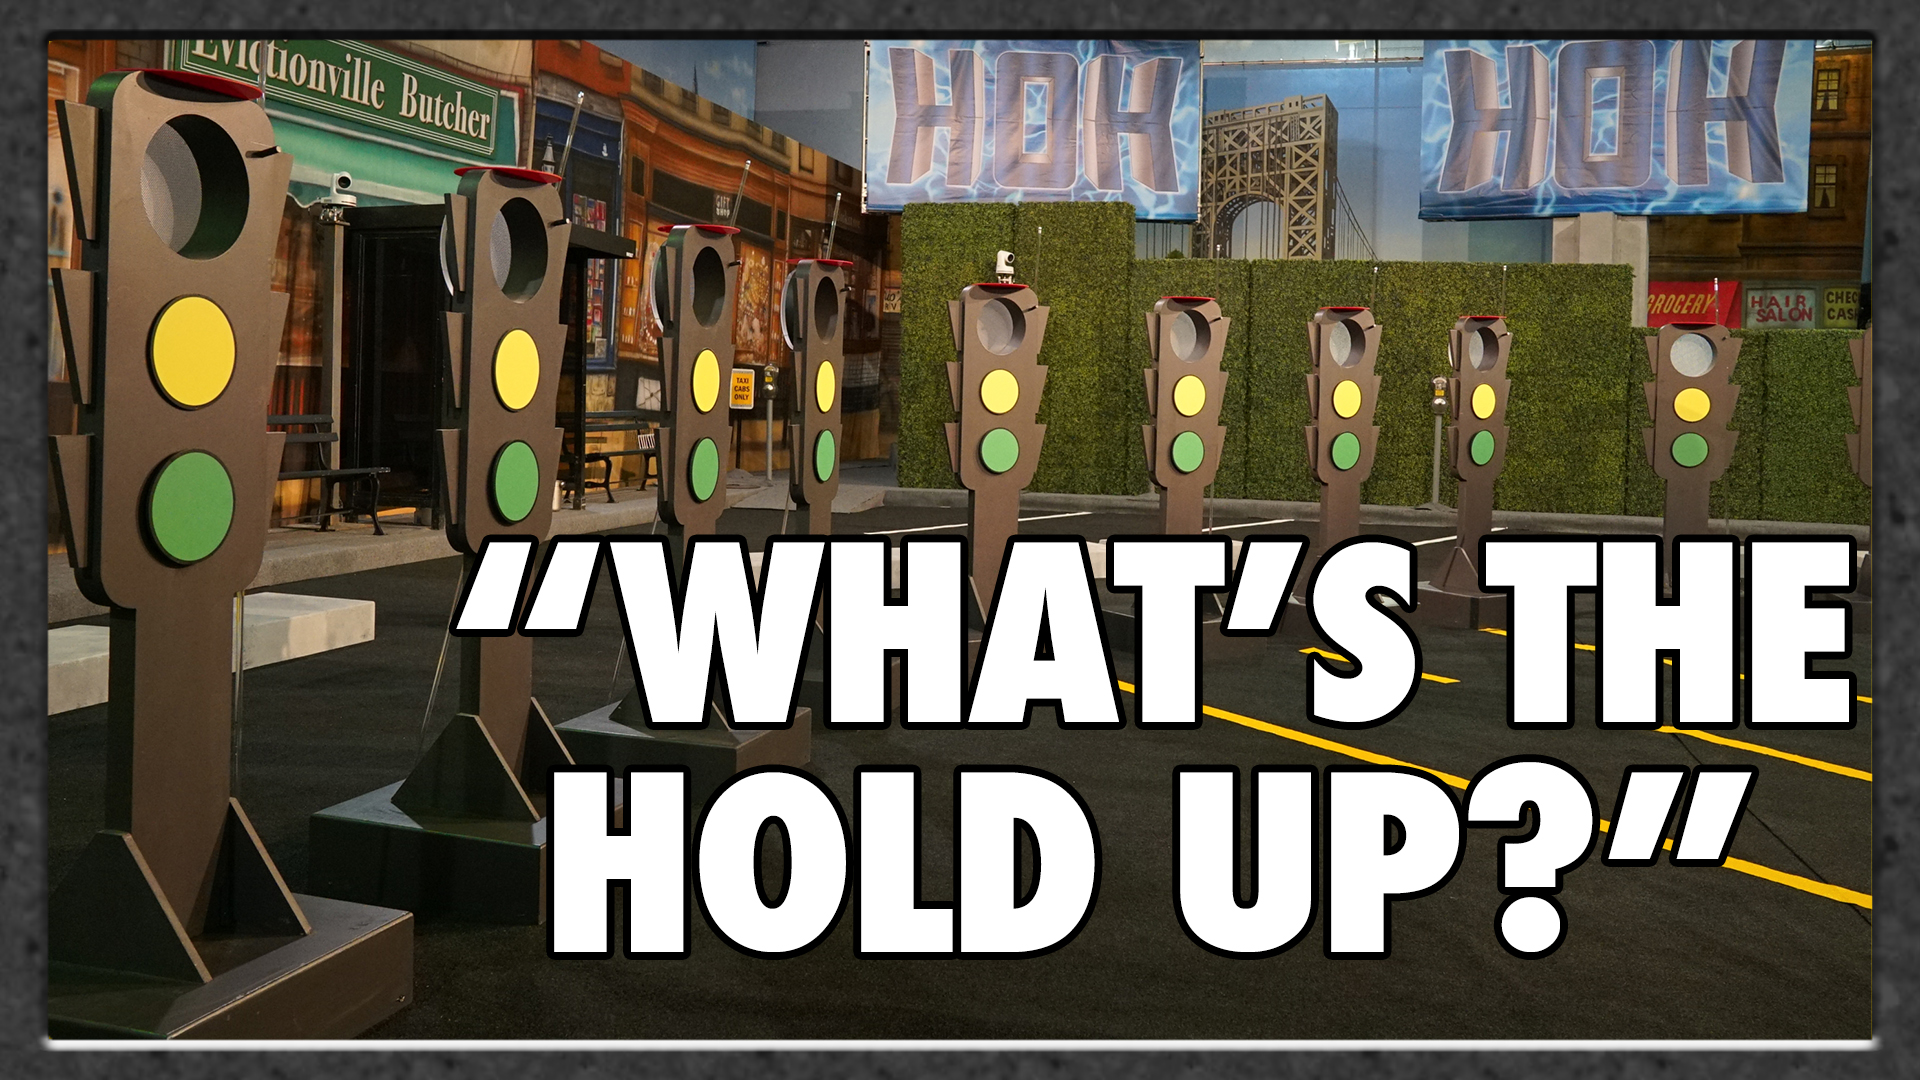 Question: What was the name of this week's HOH Competition?